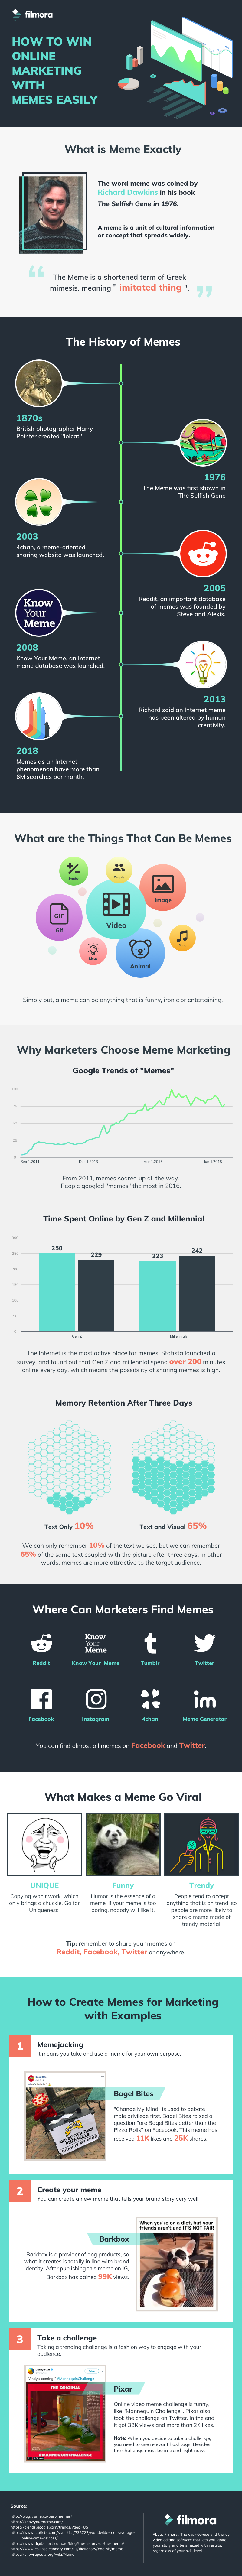 win-meme-marketing-infographic-(1).png